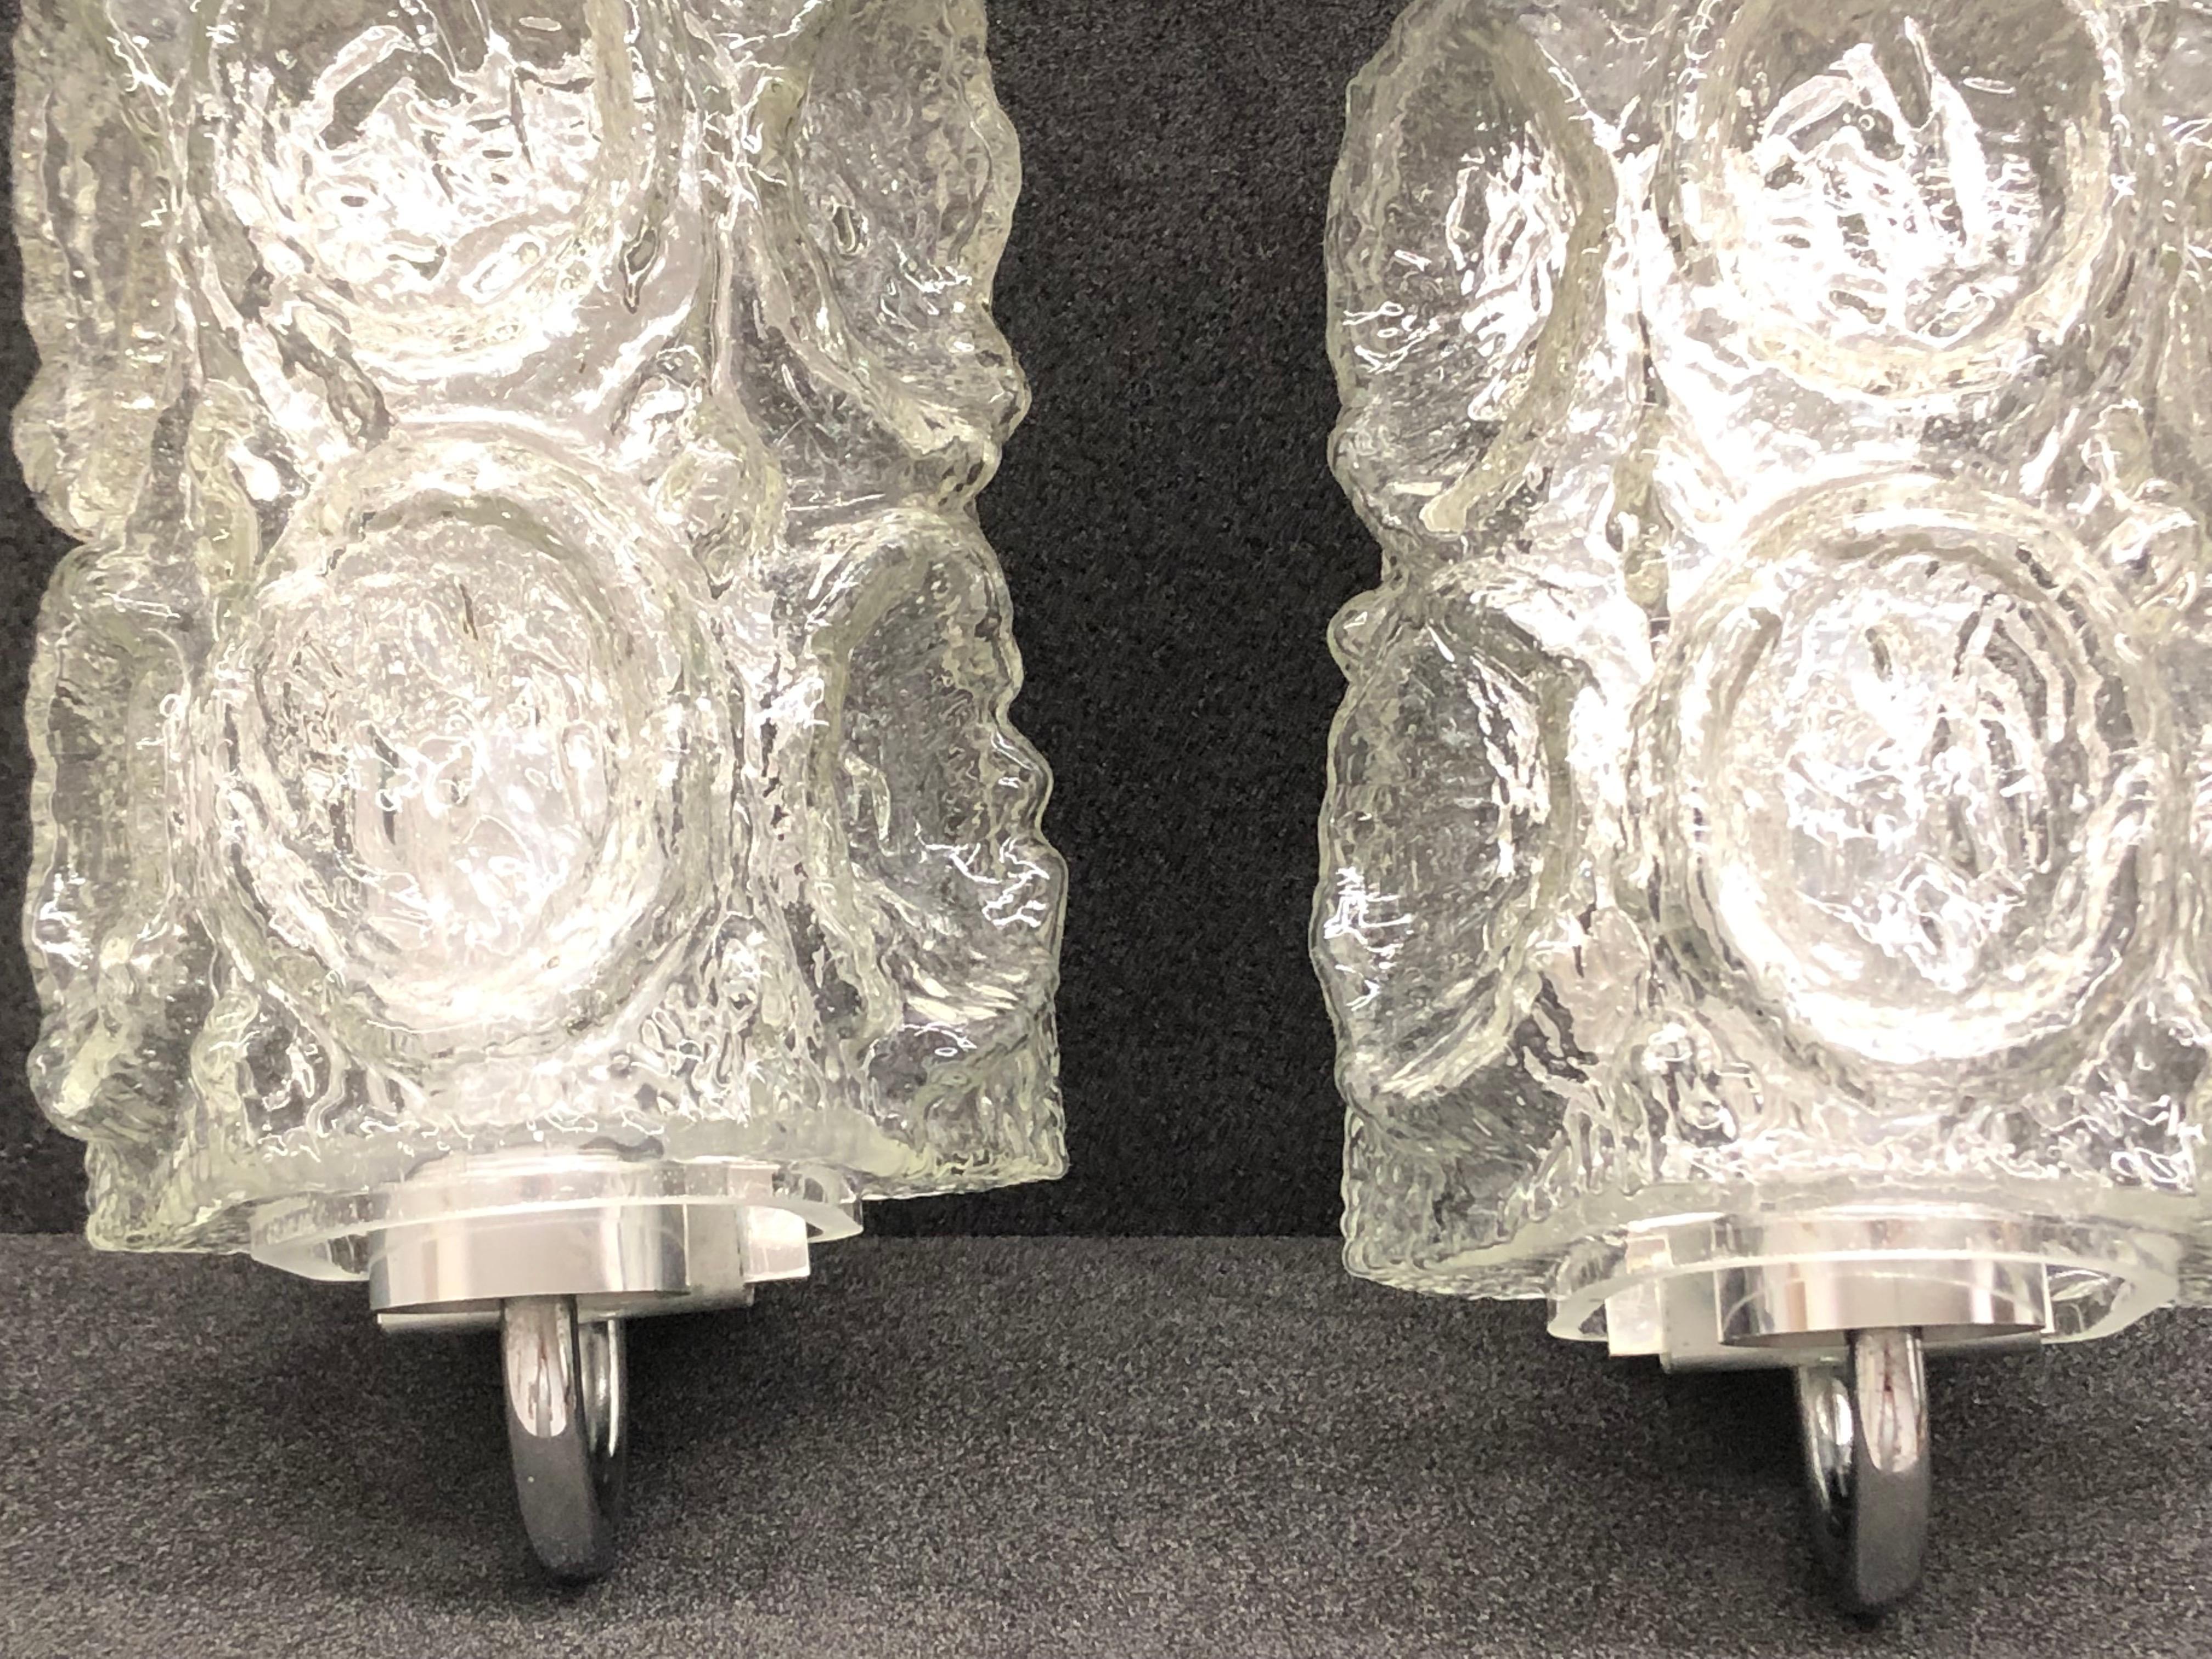 Petite sconces manufactured by Glashütte Limburg. It is a clear tone glass on a chromed metal frame. Each fixture has one European style E27 socket for light bulbs up to 100 watt.